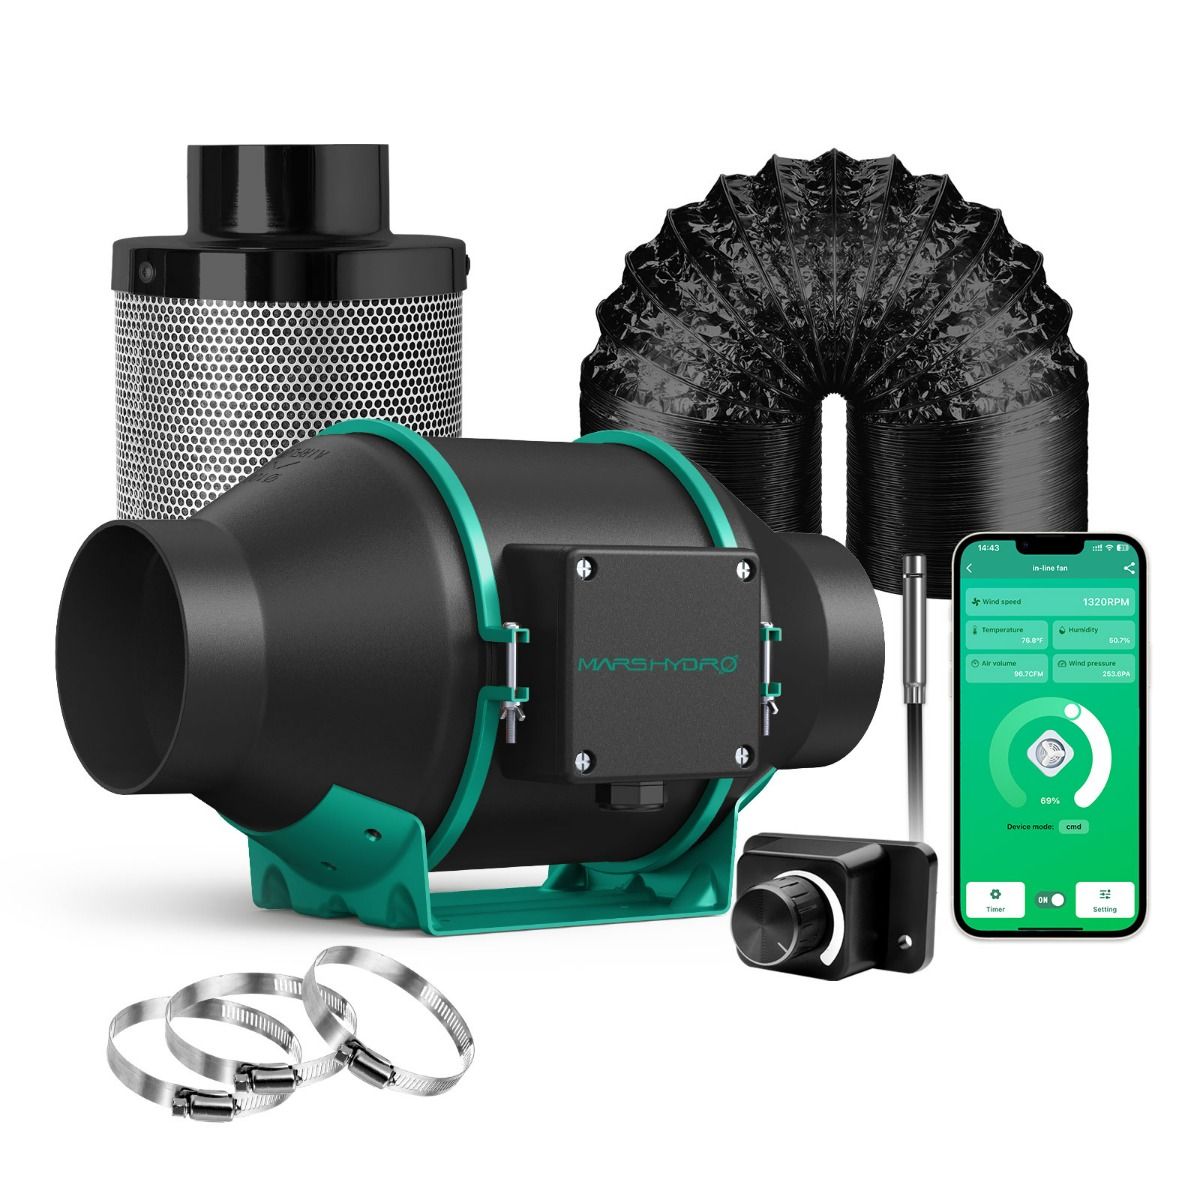 AC INFINITY AIR FILTRATION KIT PRO 8, Inline Fan, Smart Controller, Carbon  Filter & Ducting Combo